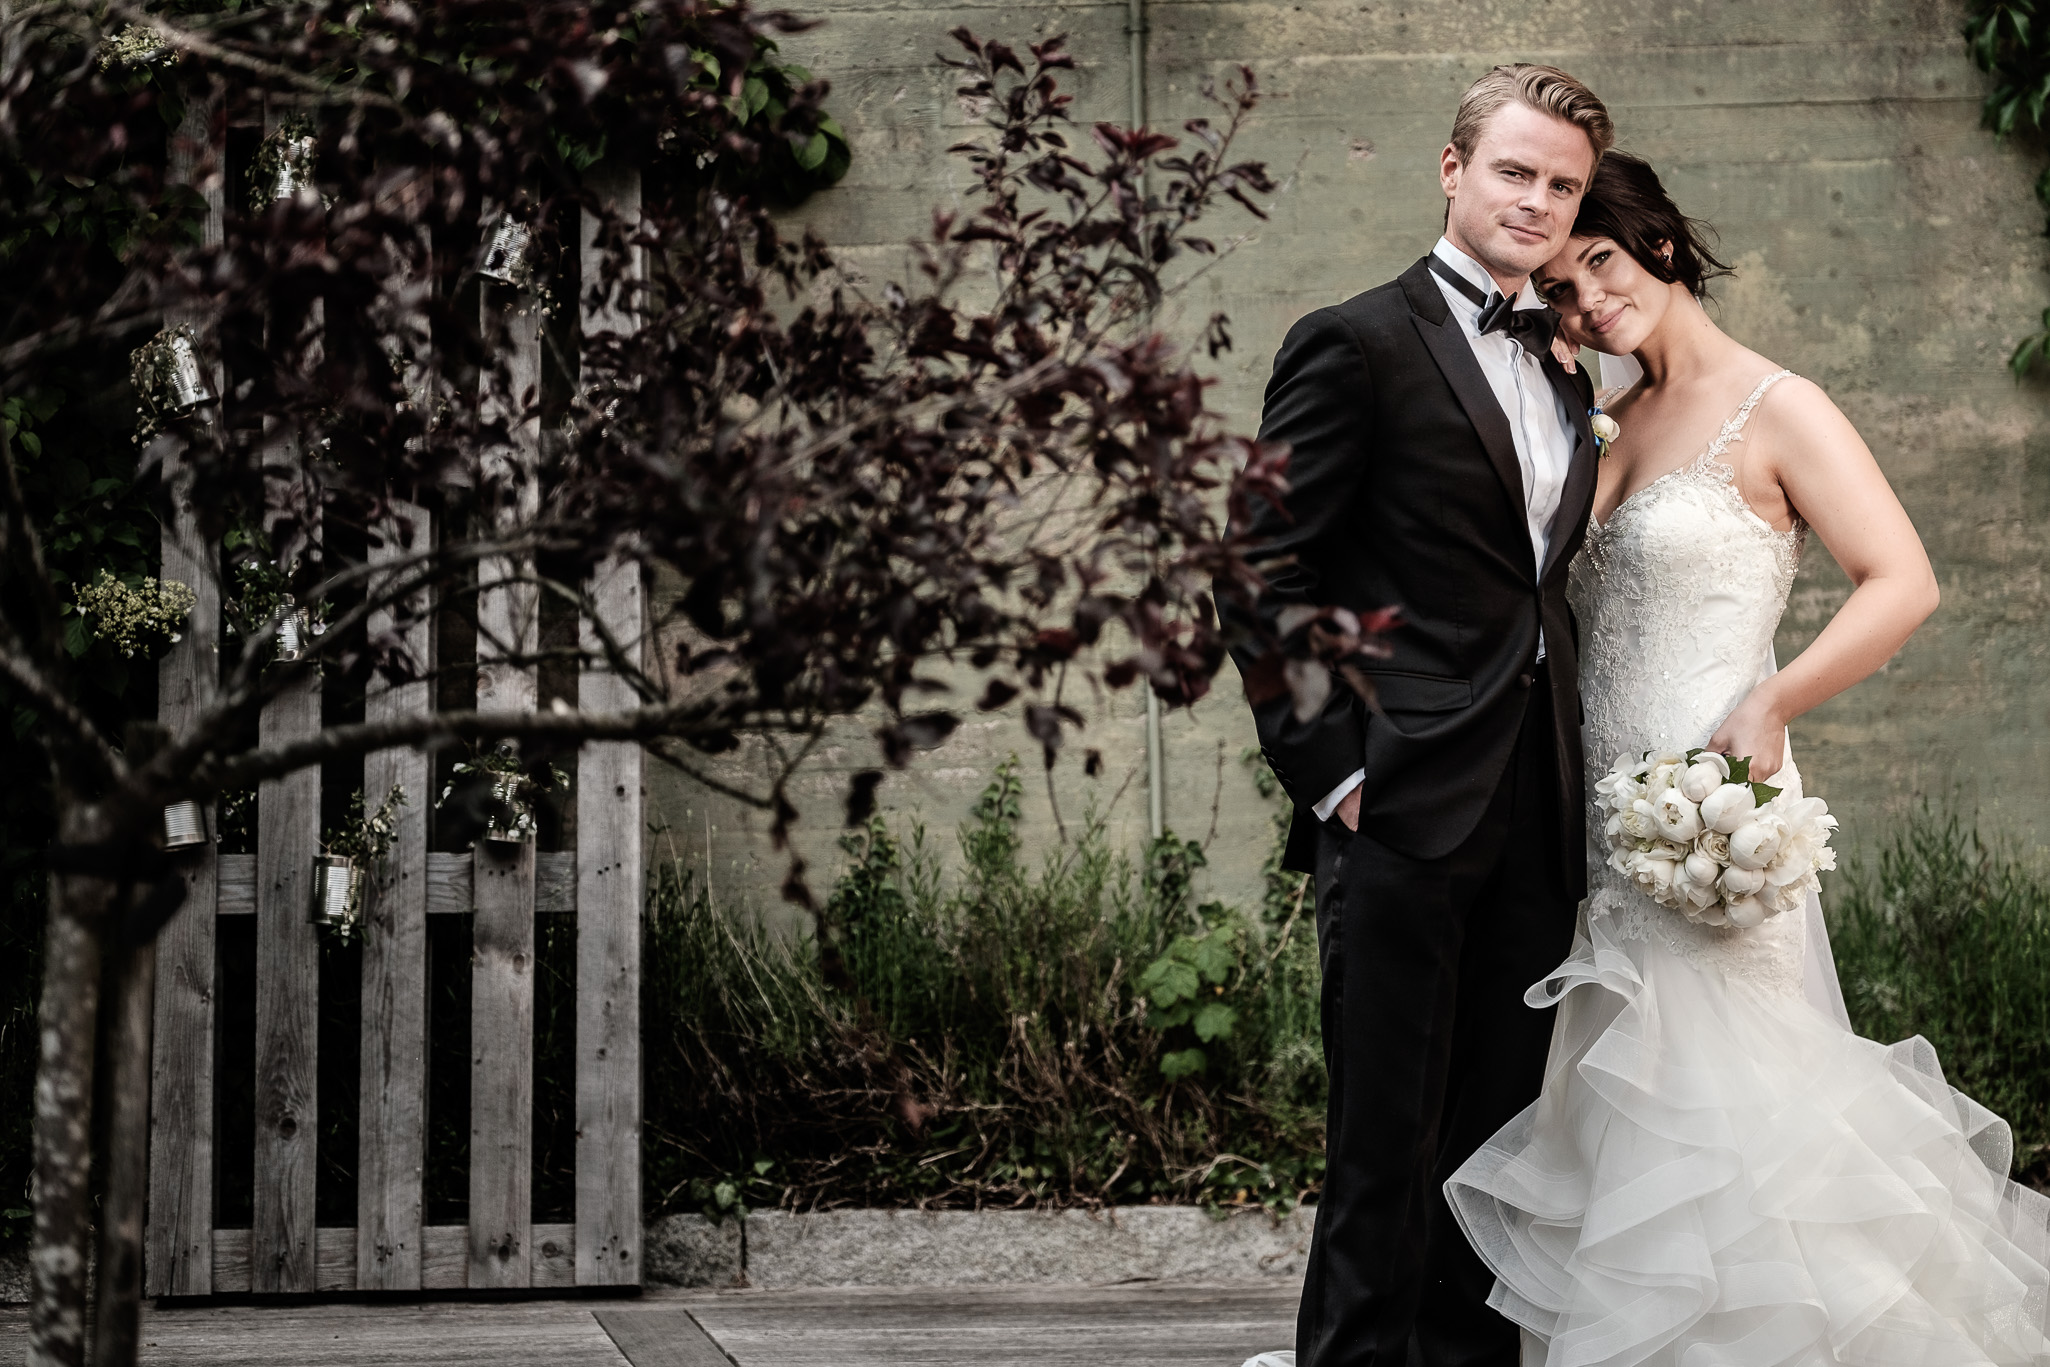 Click to enlarge image linnchristin&andreas-hallsnas-ottossonphoto-14582-XT116013.jpg